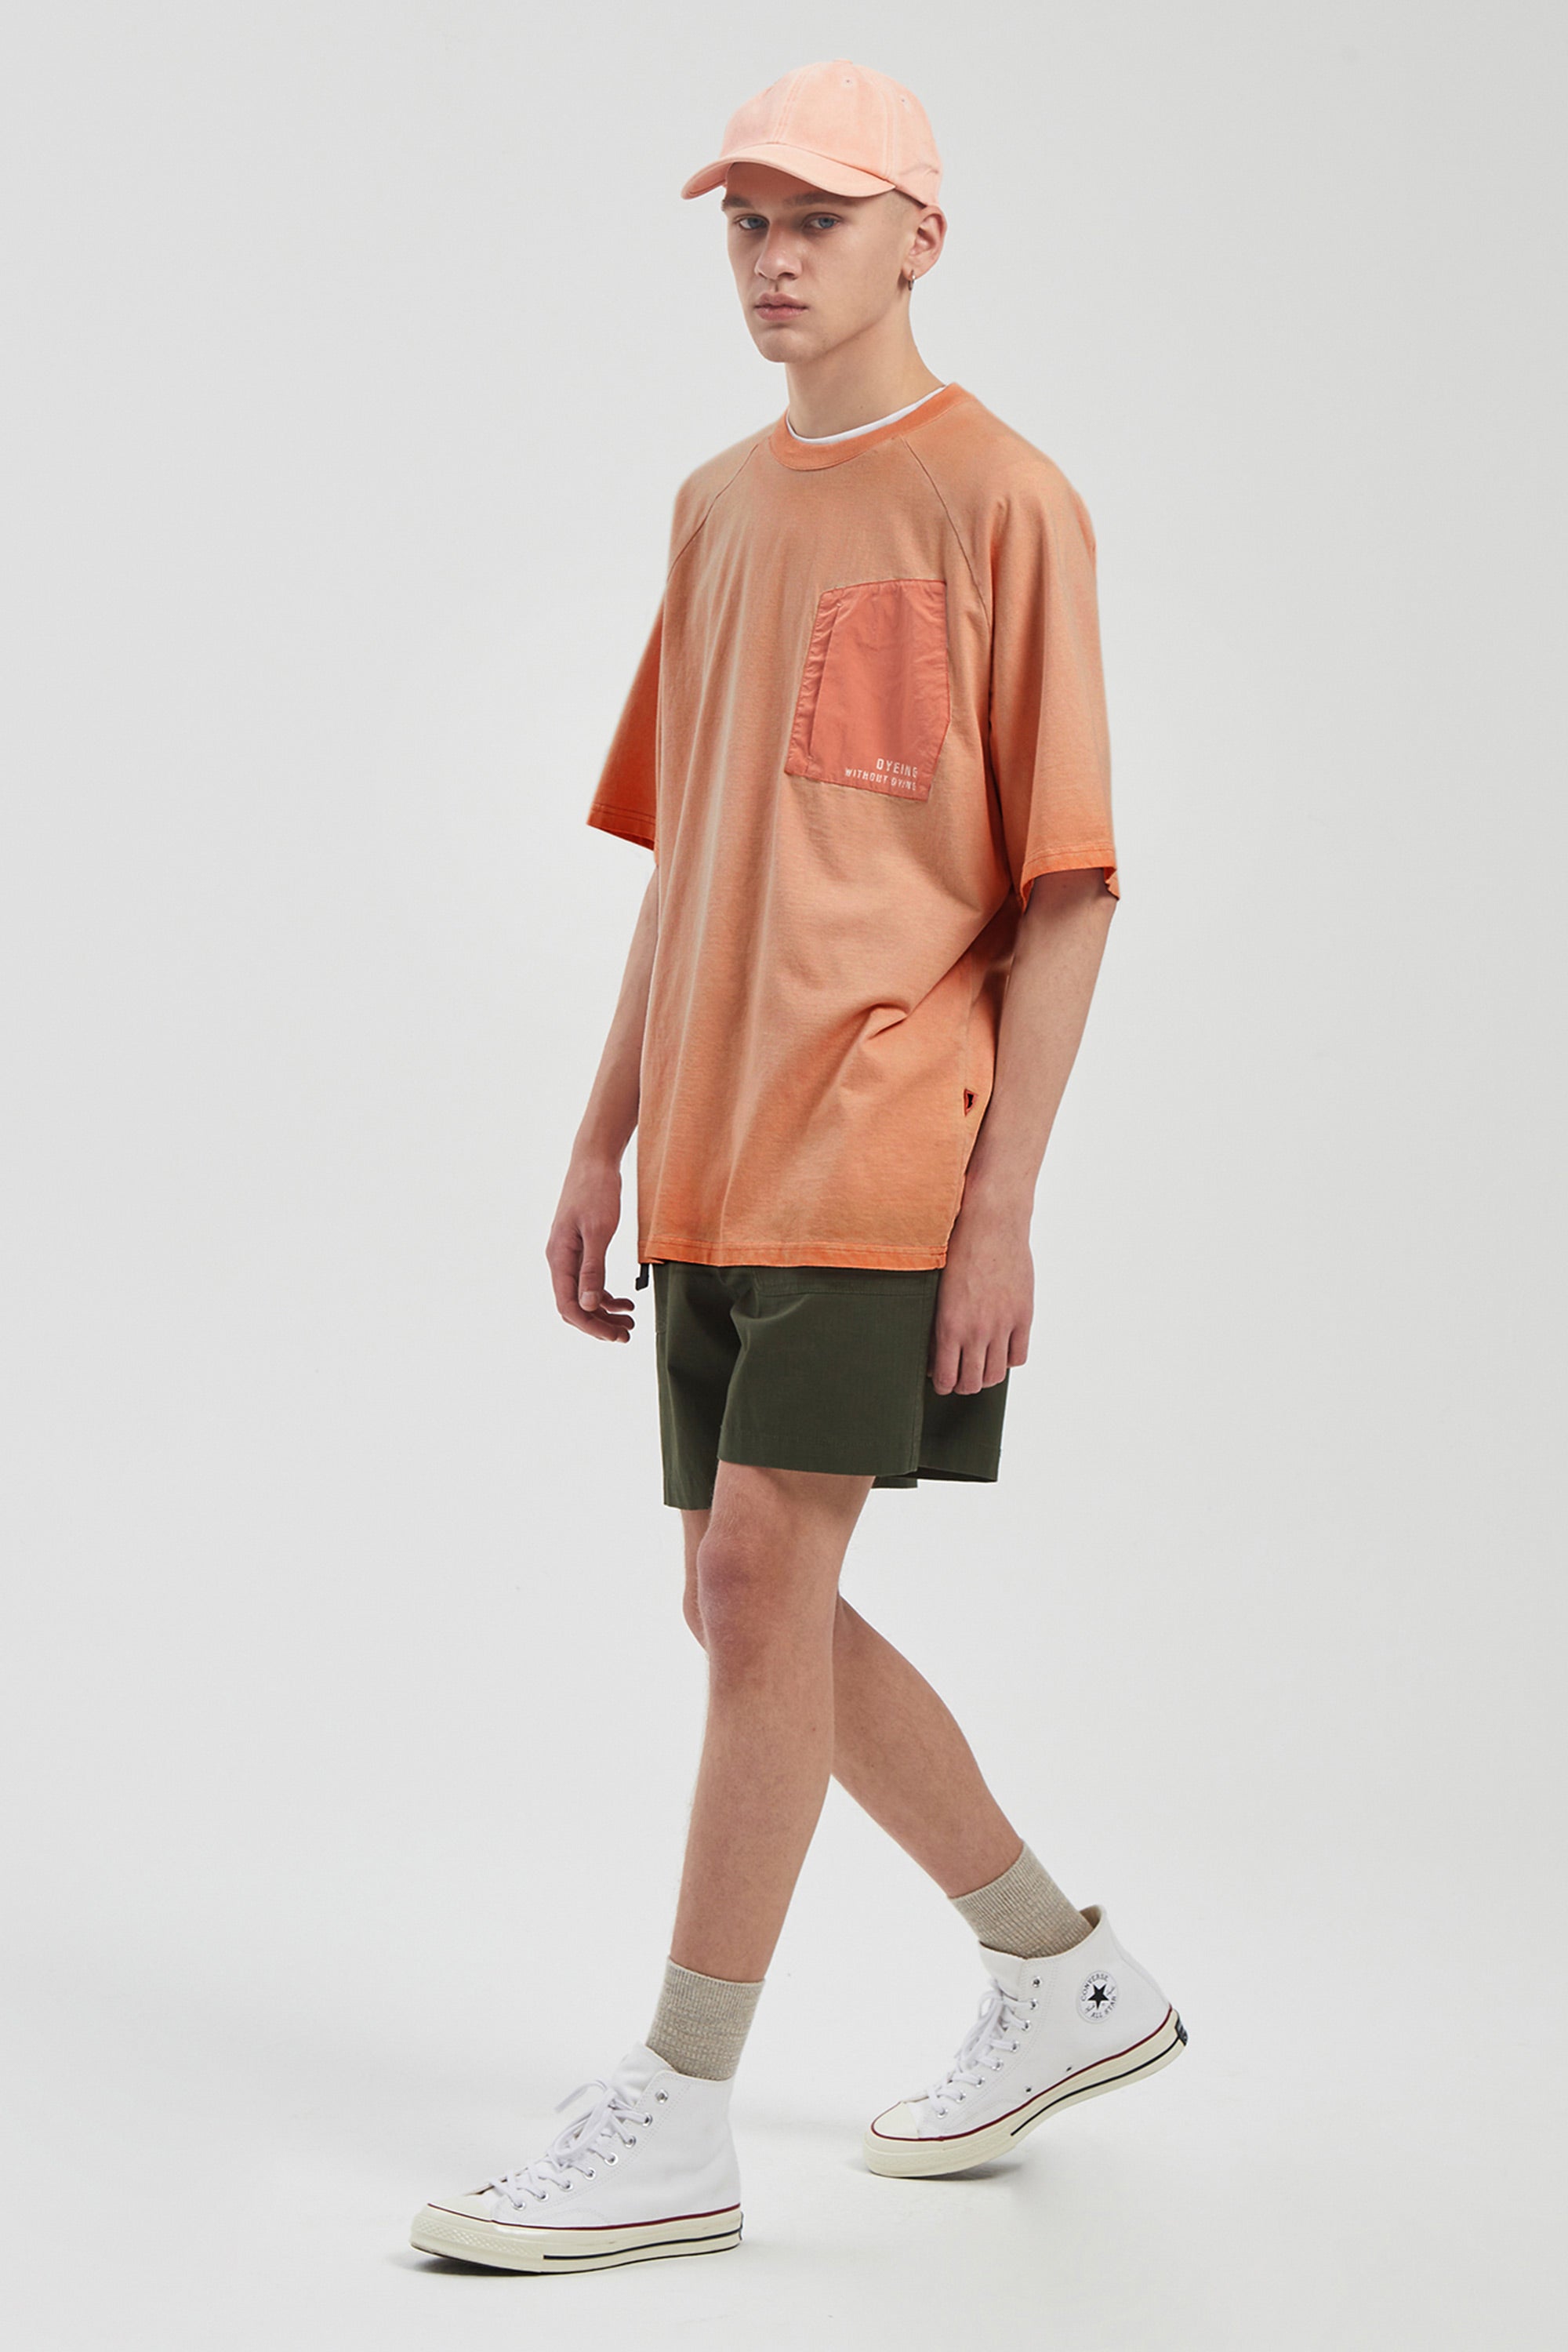 Woven Patched T-Shirt